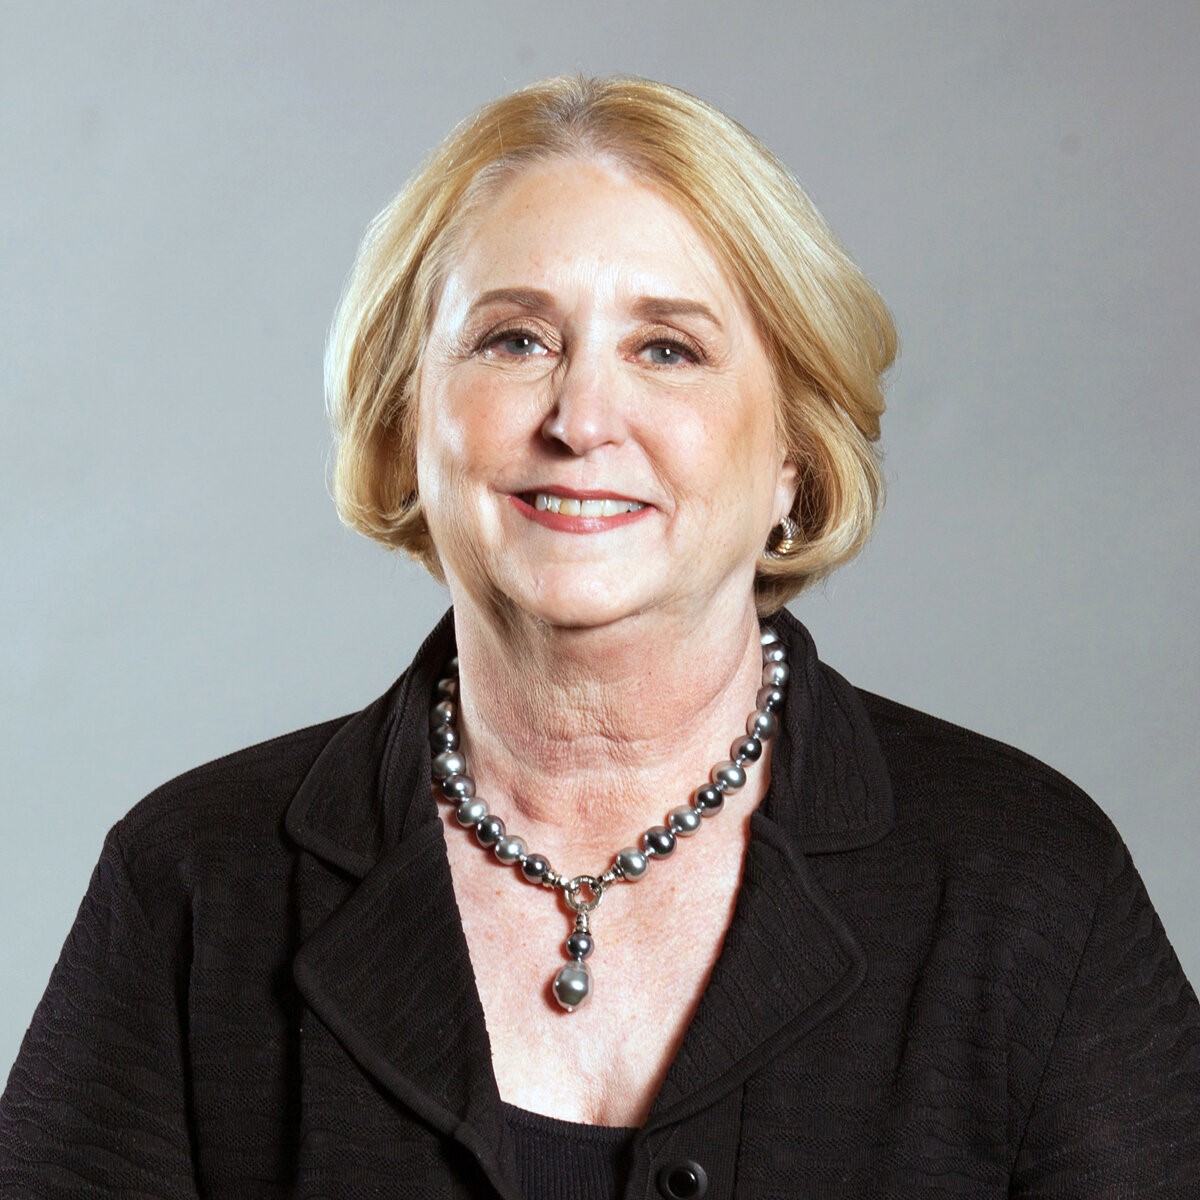 Headshot of a white woman dressed in professional attire